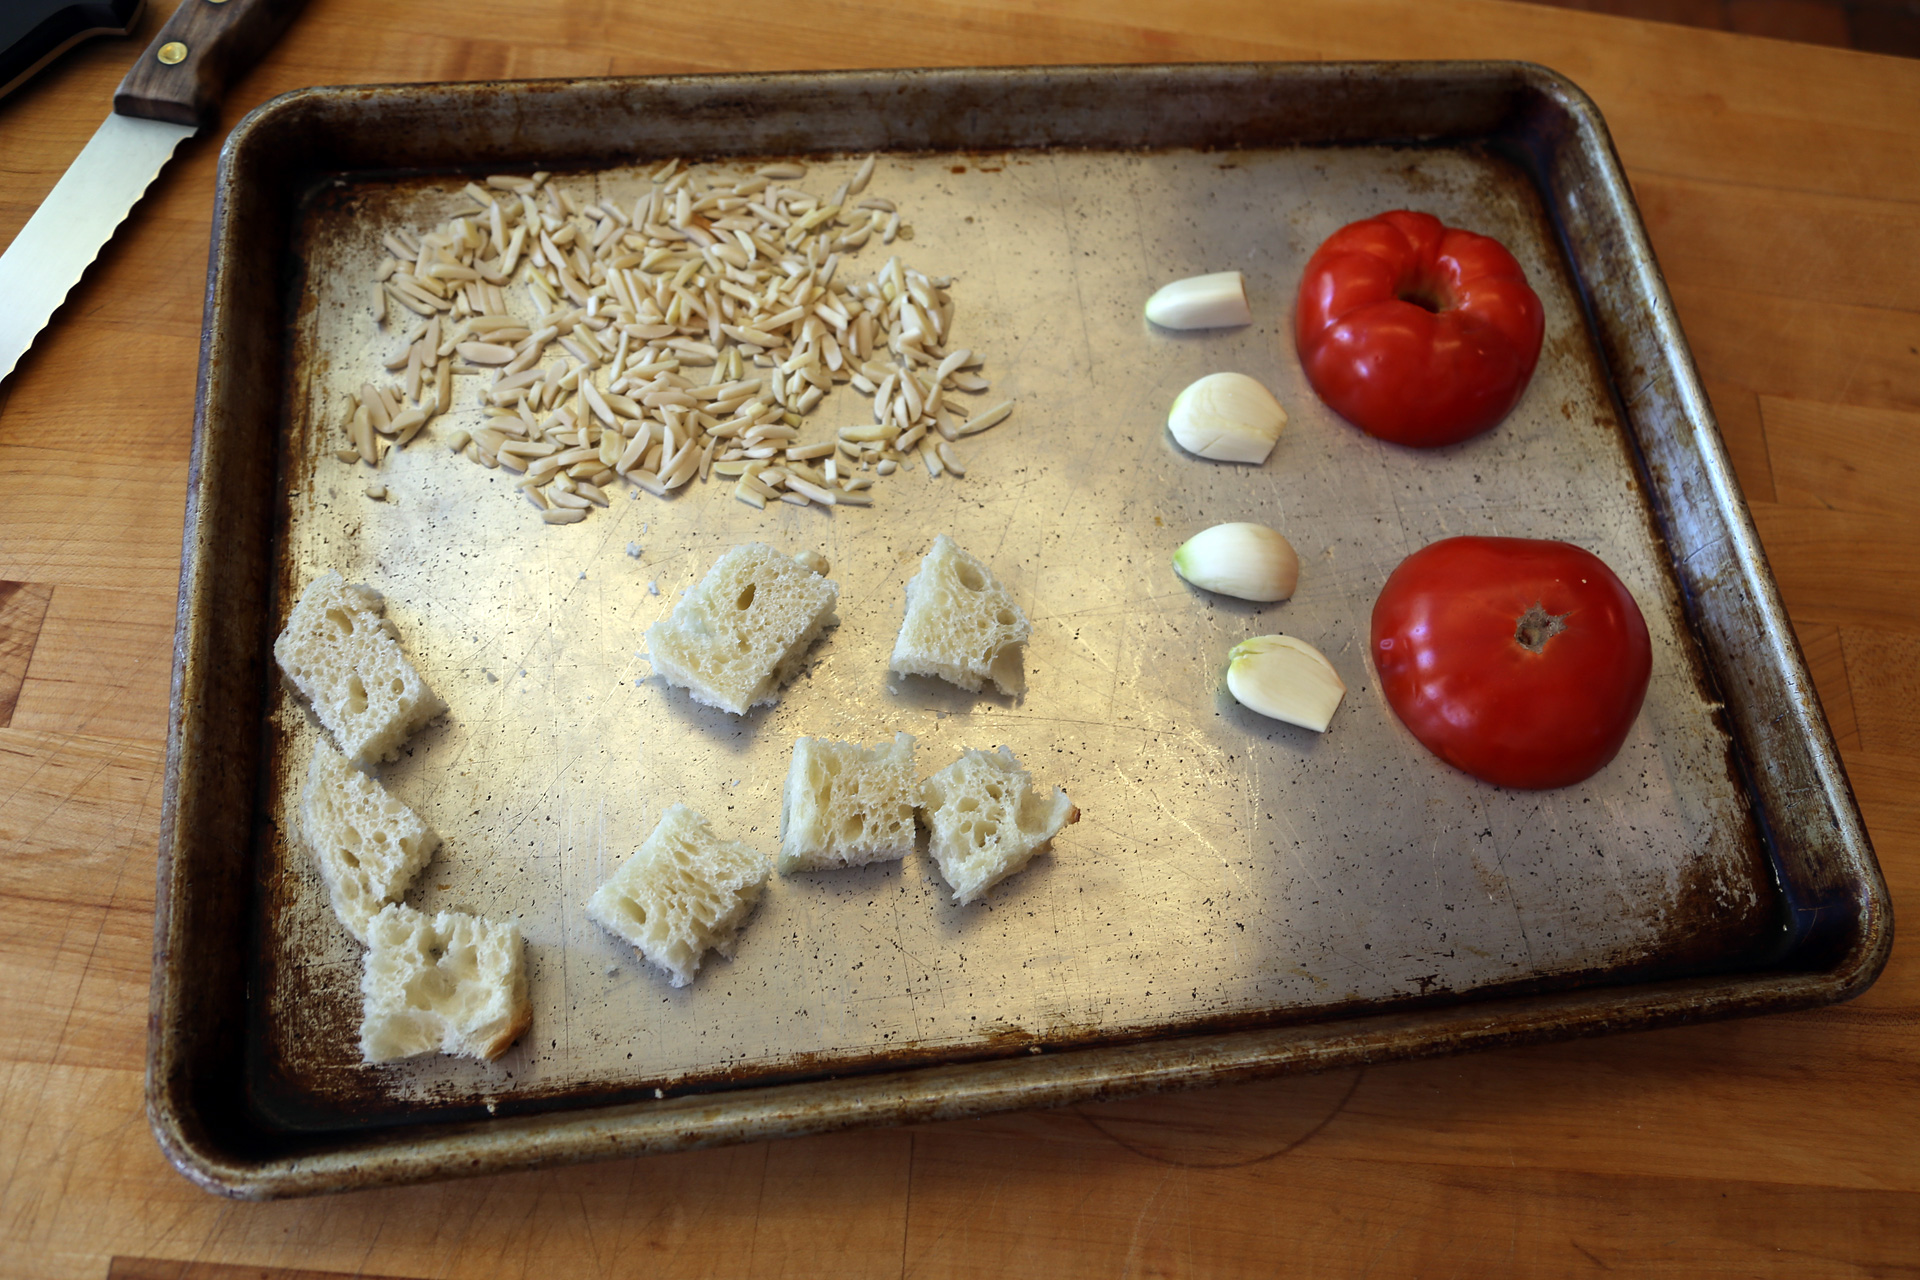 Place the tomato, cut side down on one side of a rimmed baking sheet and arrange the garlic next to it. On the other side, add the bread and almonds.